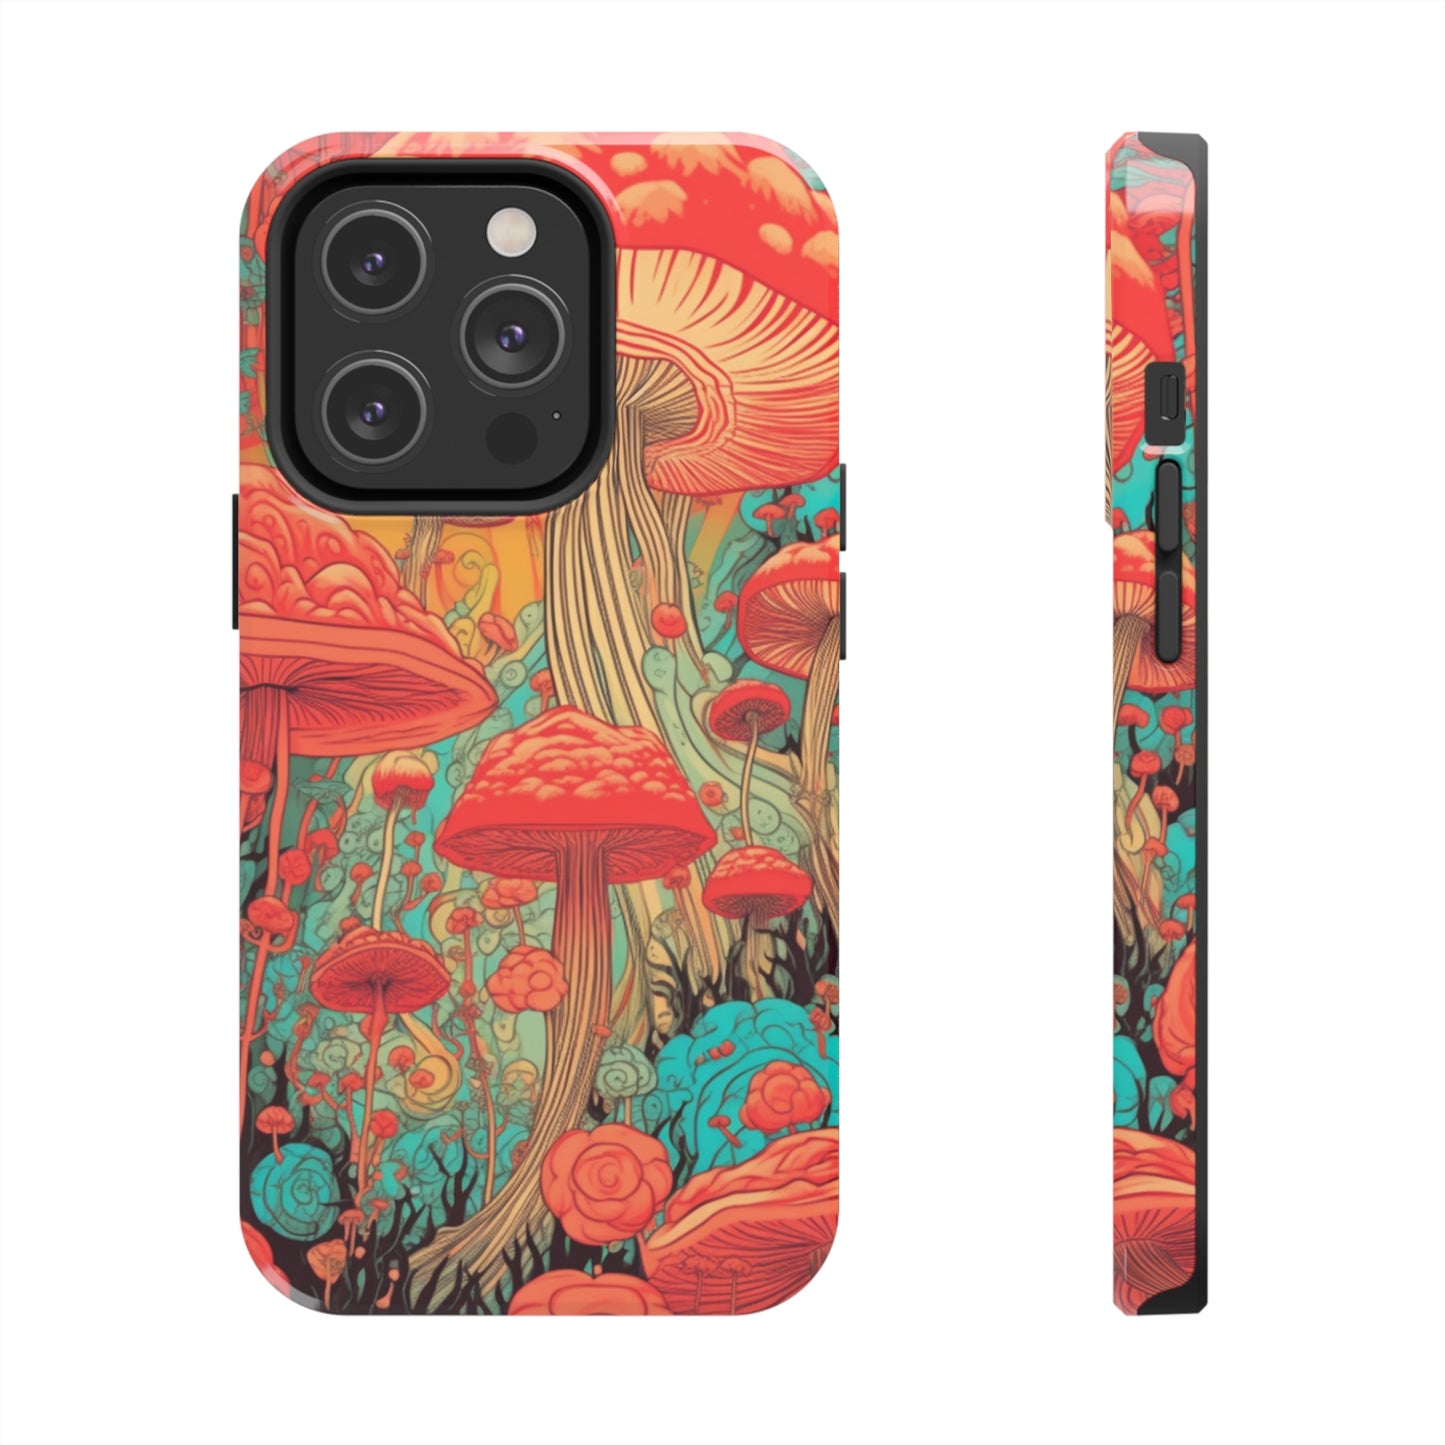 Psychedelic Art Phone Cover